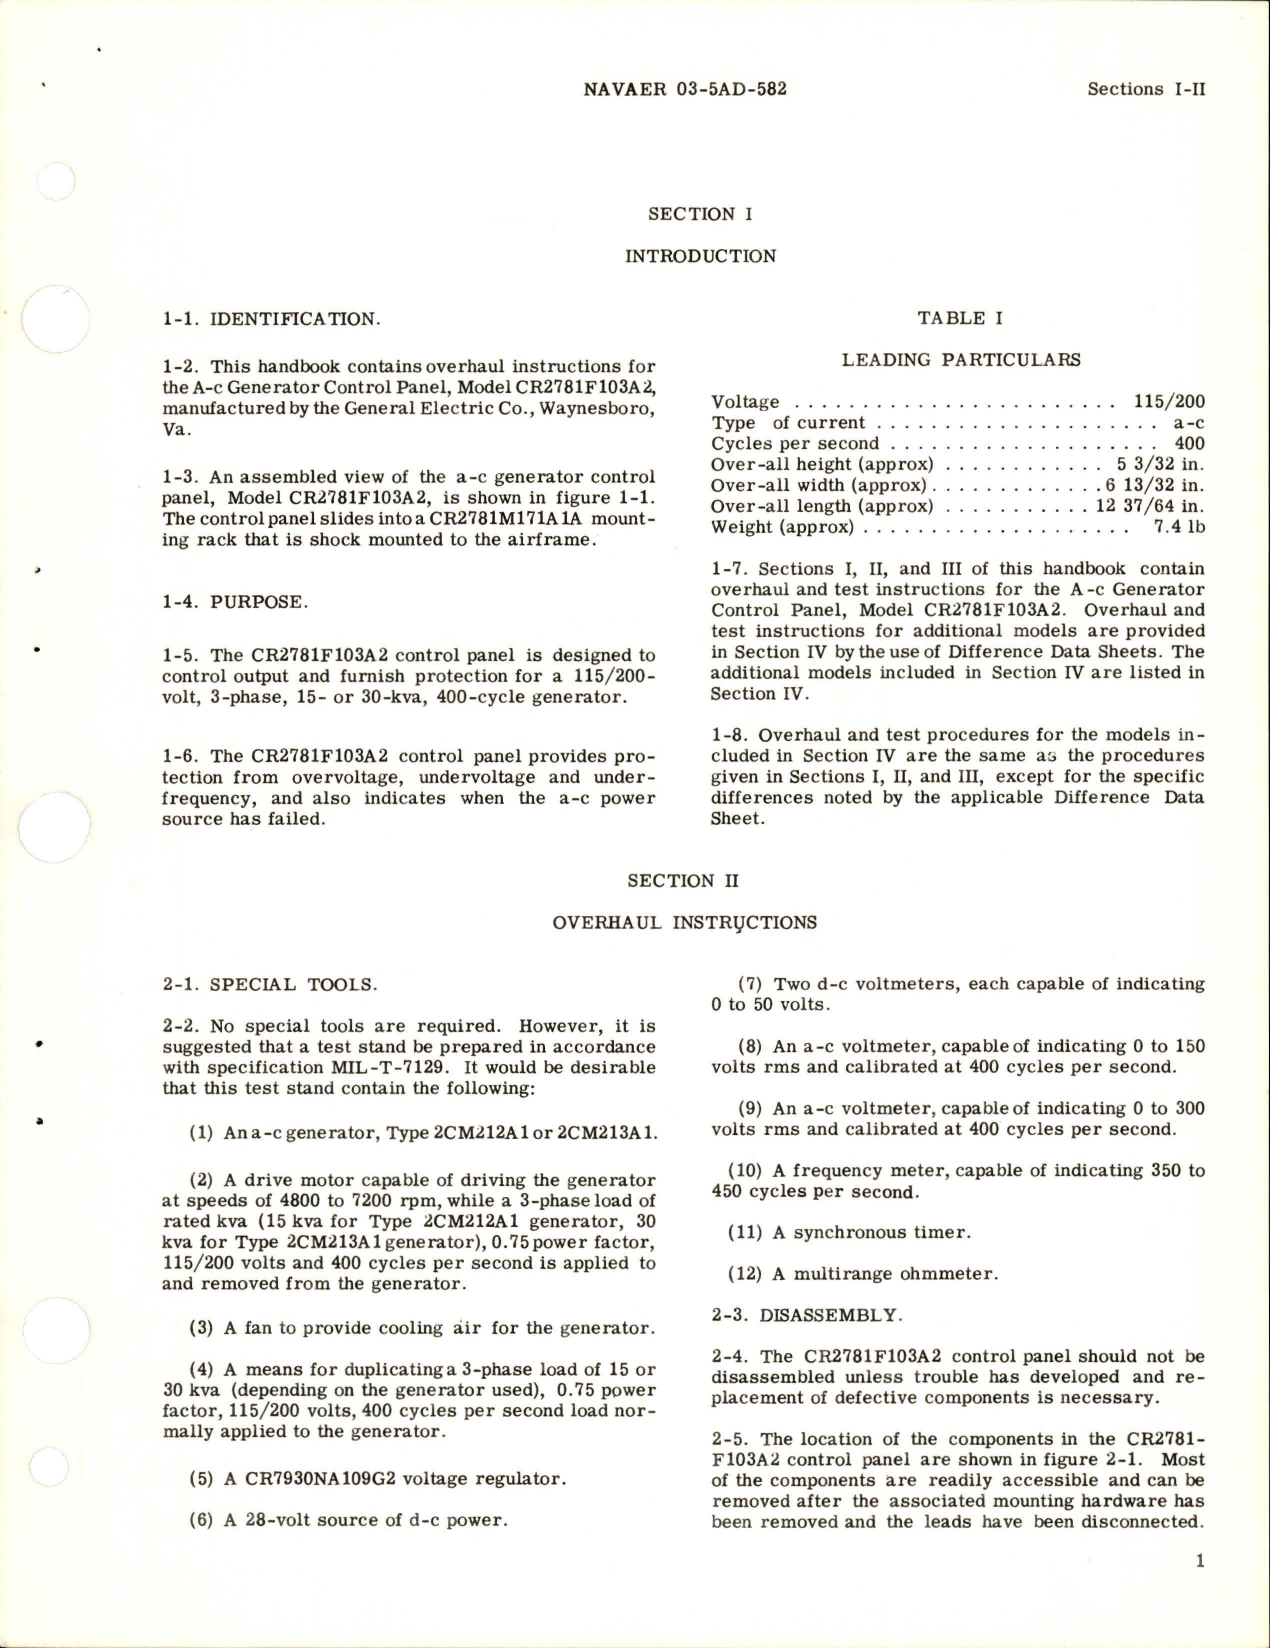 Sample page 5 from AirCorps Library document: Overhaul Instructions for AC Generator Control Panel - Models CR2781F103A2 and CR2781F103B1 